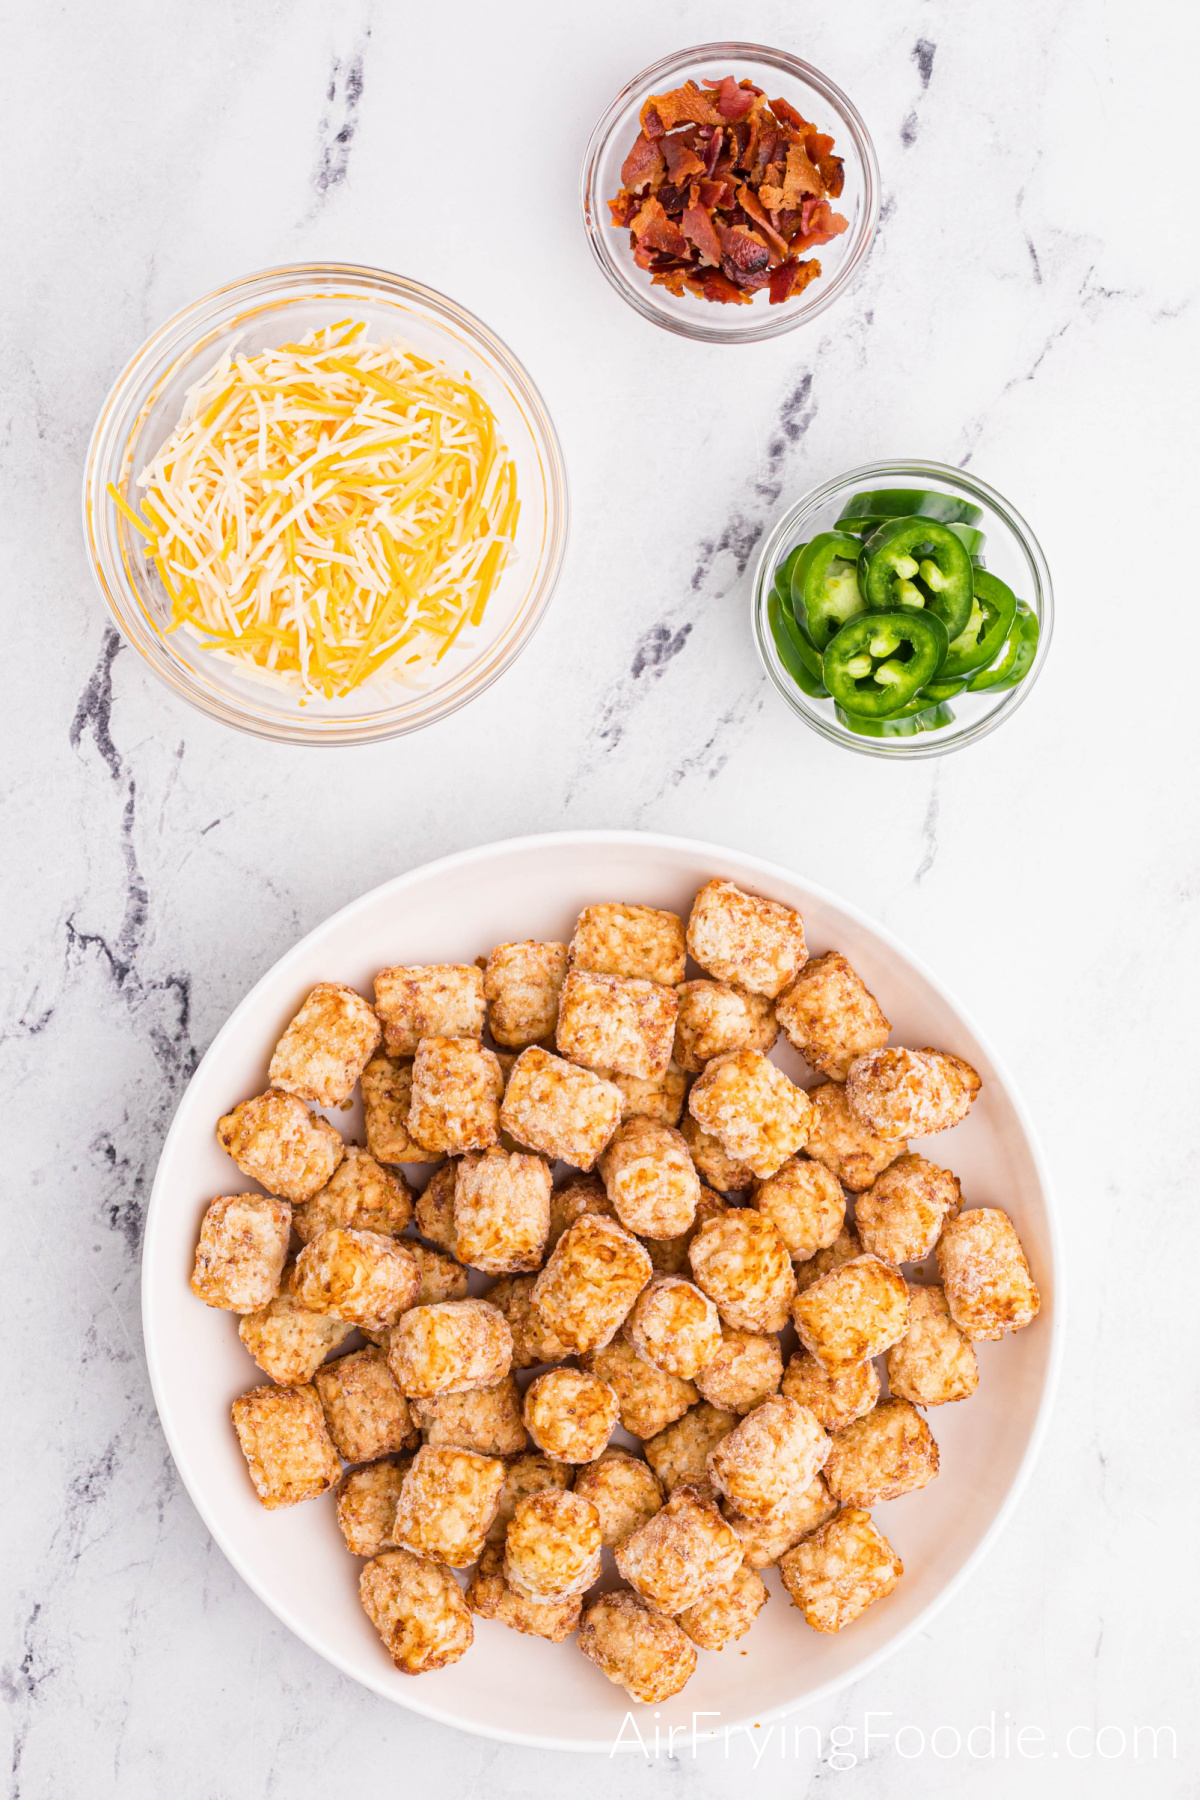 Plate full of frozen tater tots, and cheese, bacon, and jalapenos in bowls on a table.